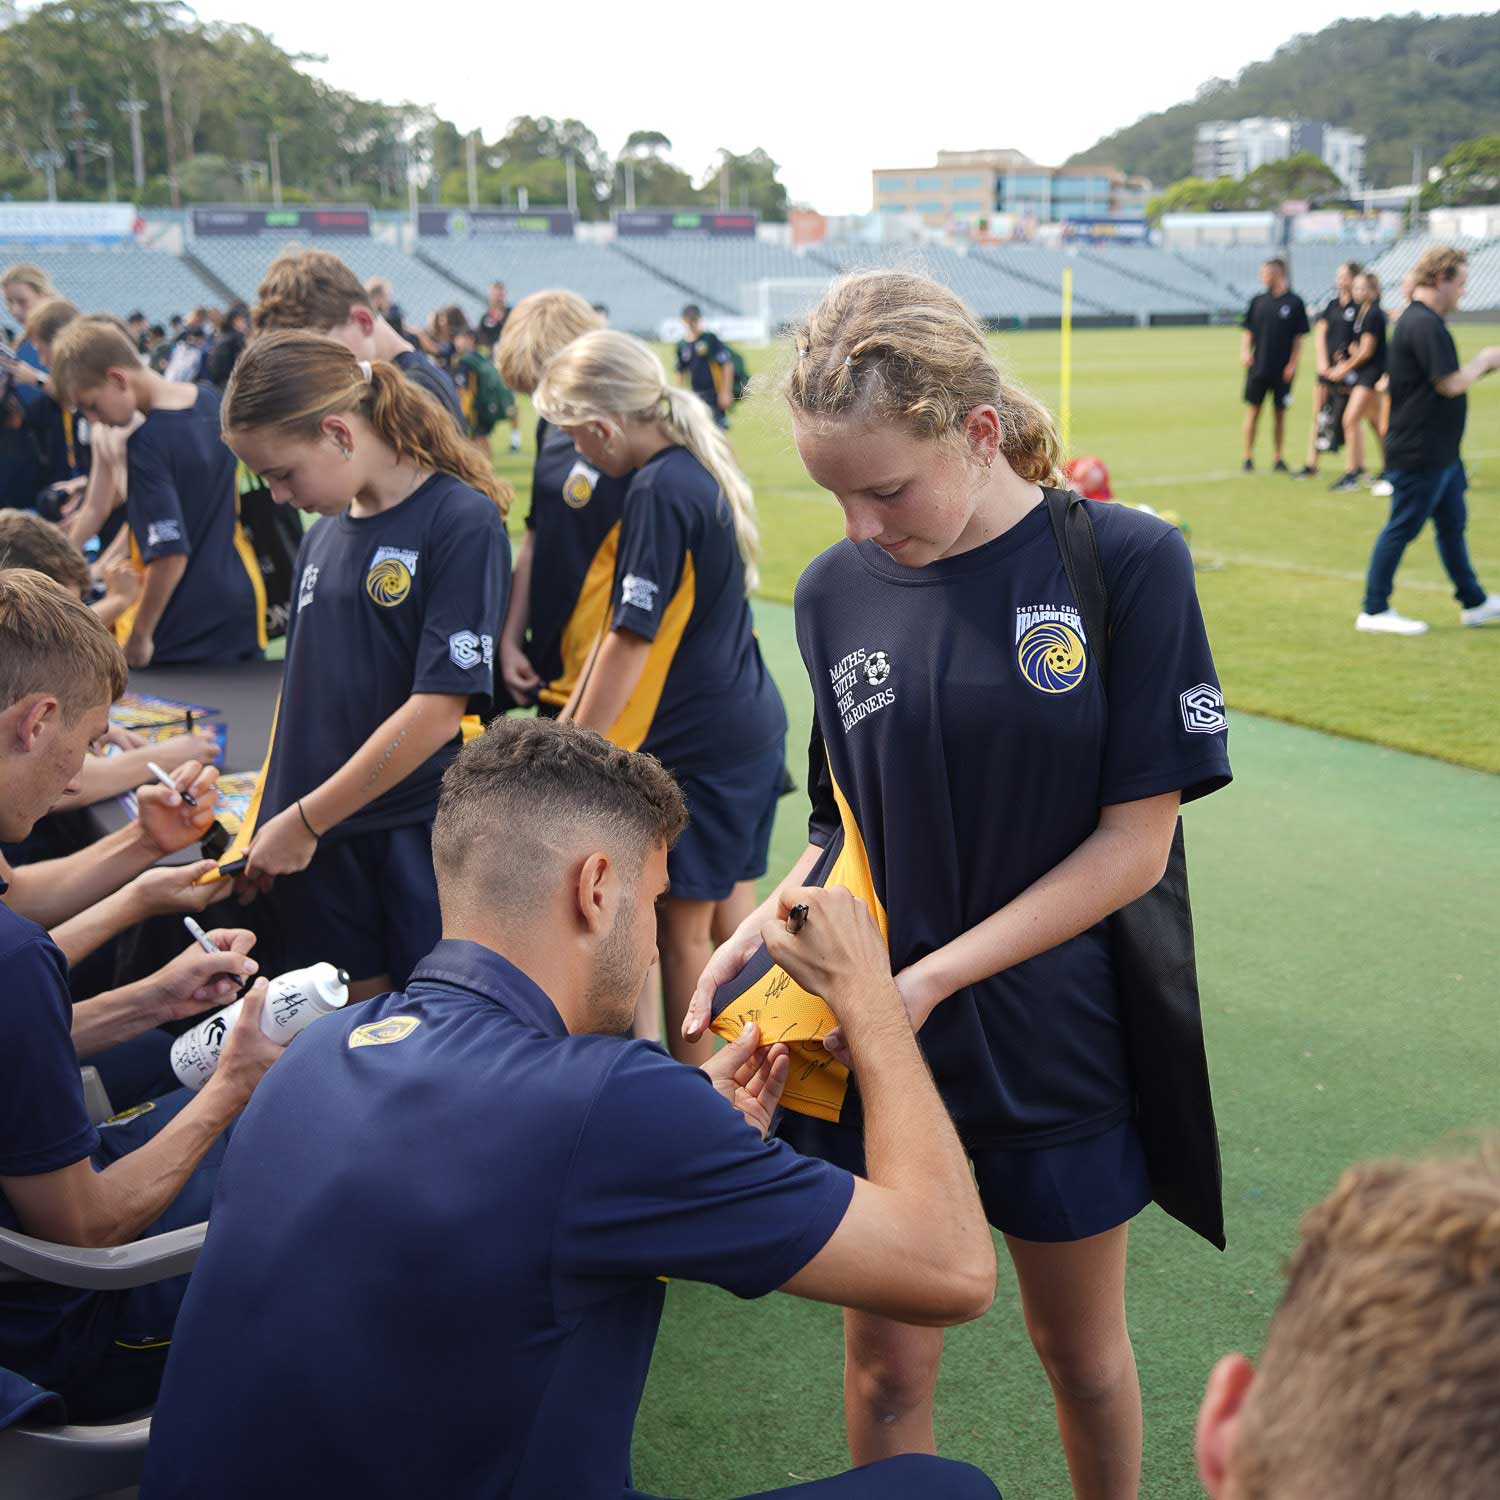 School students meeting Central Coast Mariners players ^empty:{ds__assetid^as_asset:asset_name}